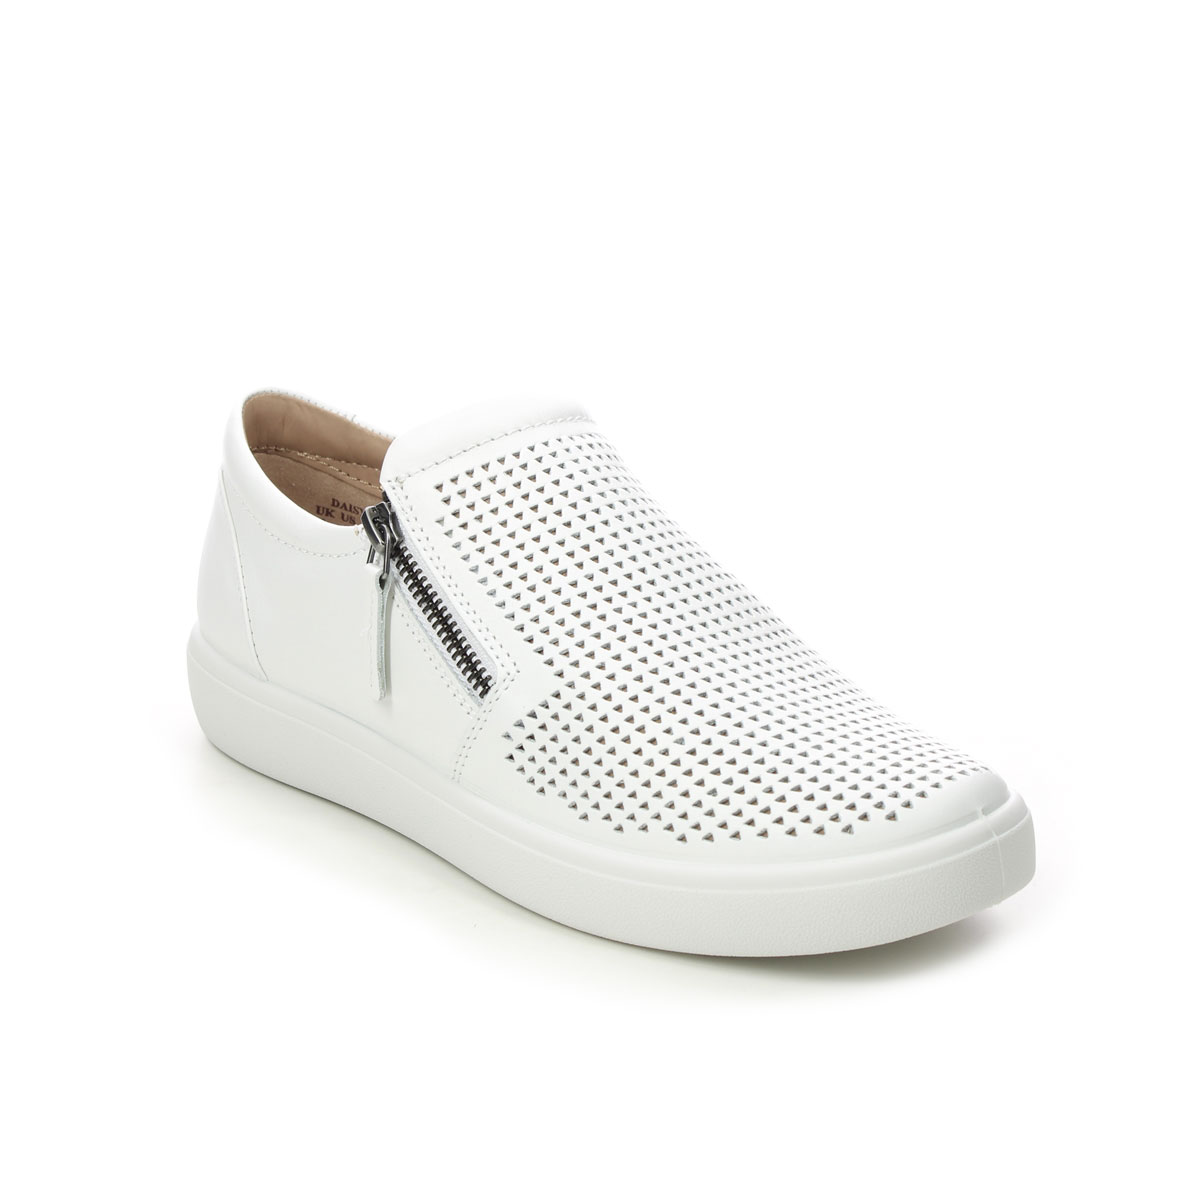 Hotter Daisy Wide White Leather Womens Comfort Slip On Shoes 16212-61